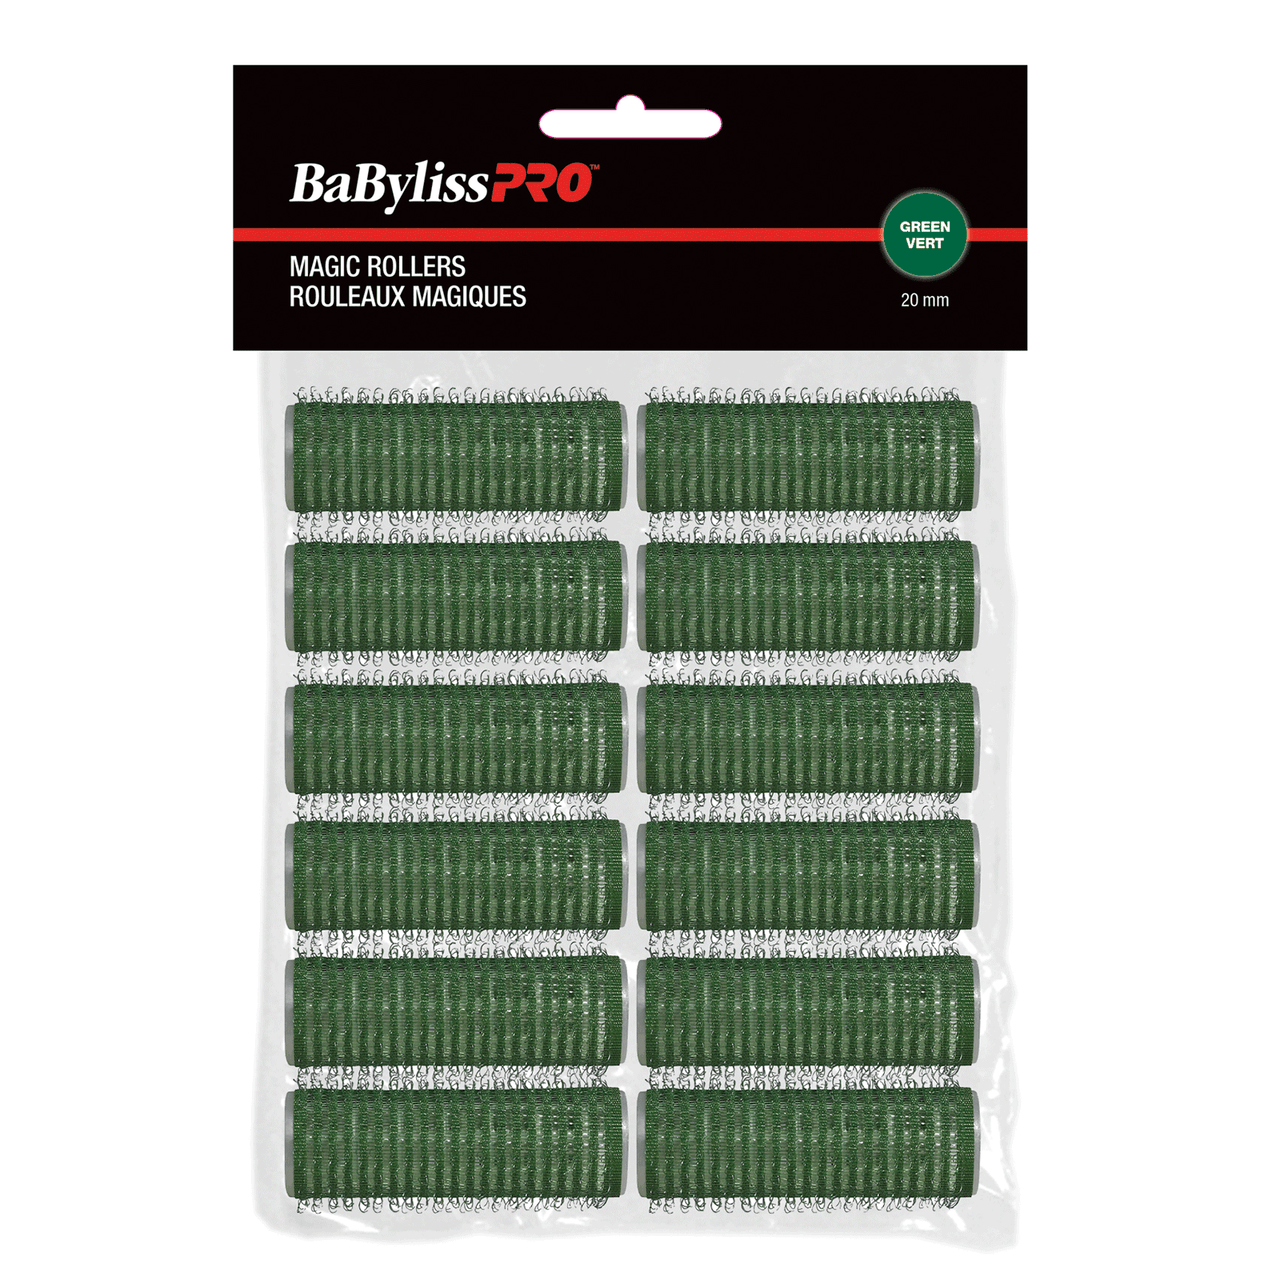 Dannyco Sundries BaByliss Pro Magic Rollers 20mm - 12 Count